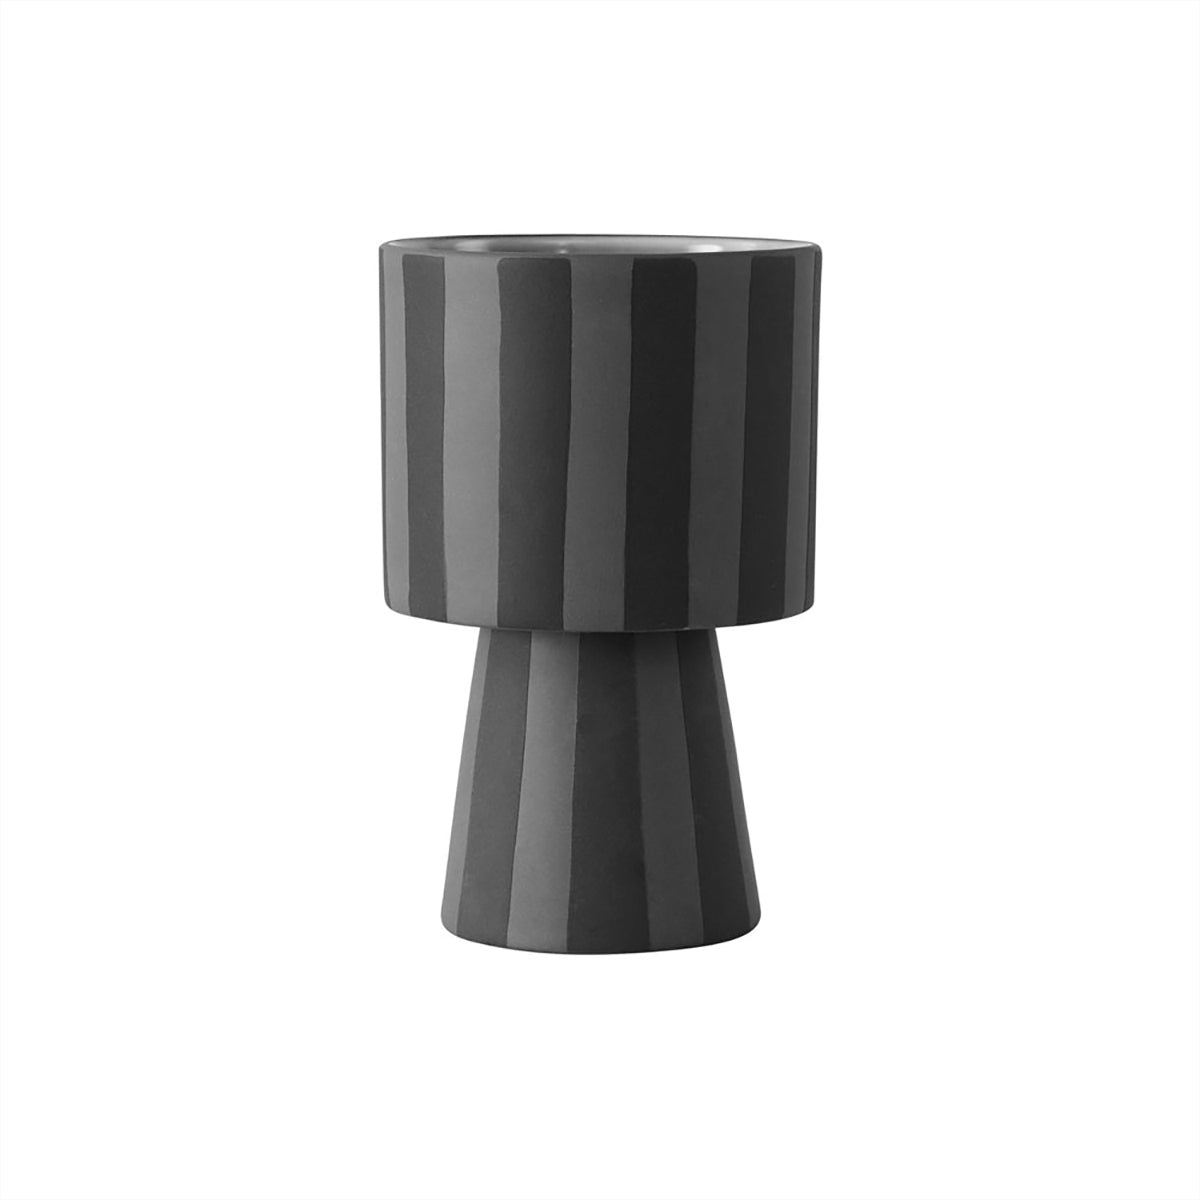 OYOY LIVING Toppu Pot - Small Vase 203 Grey / Anthracite